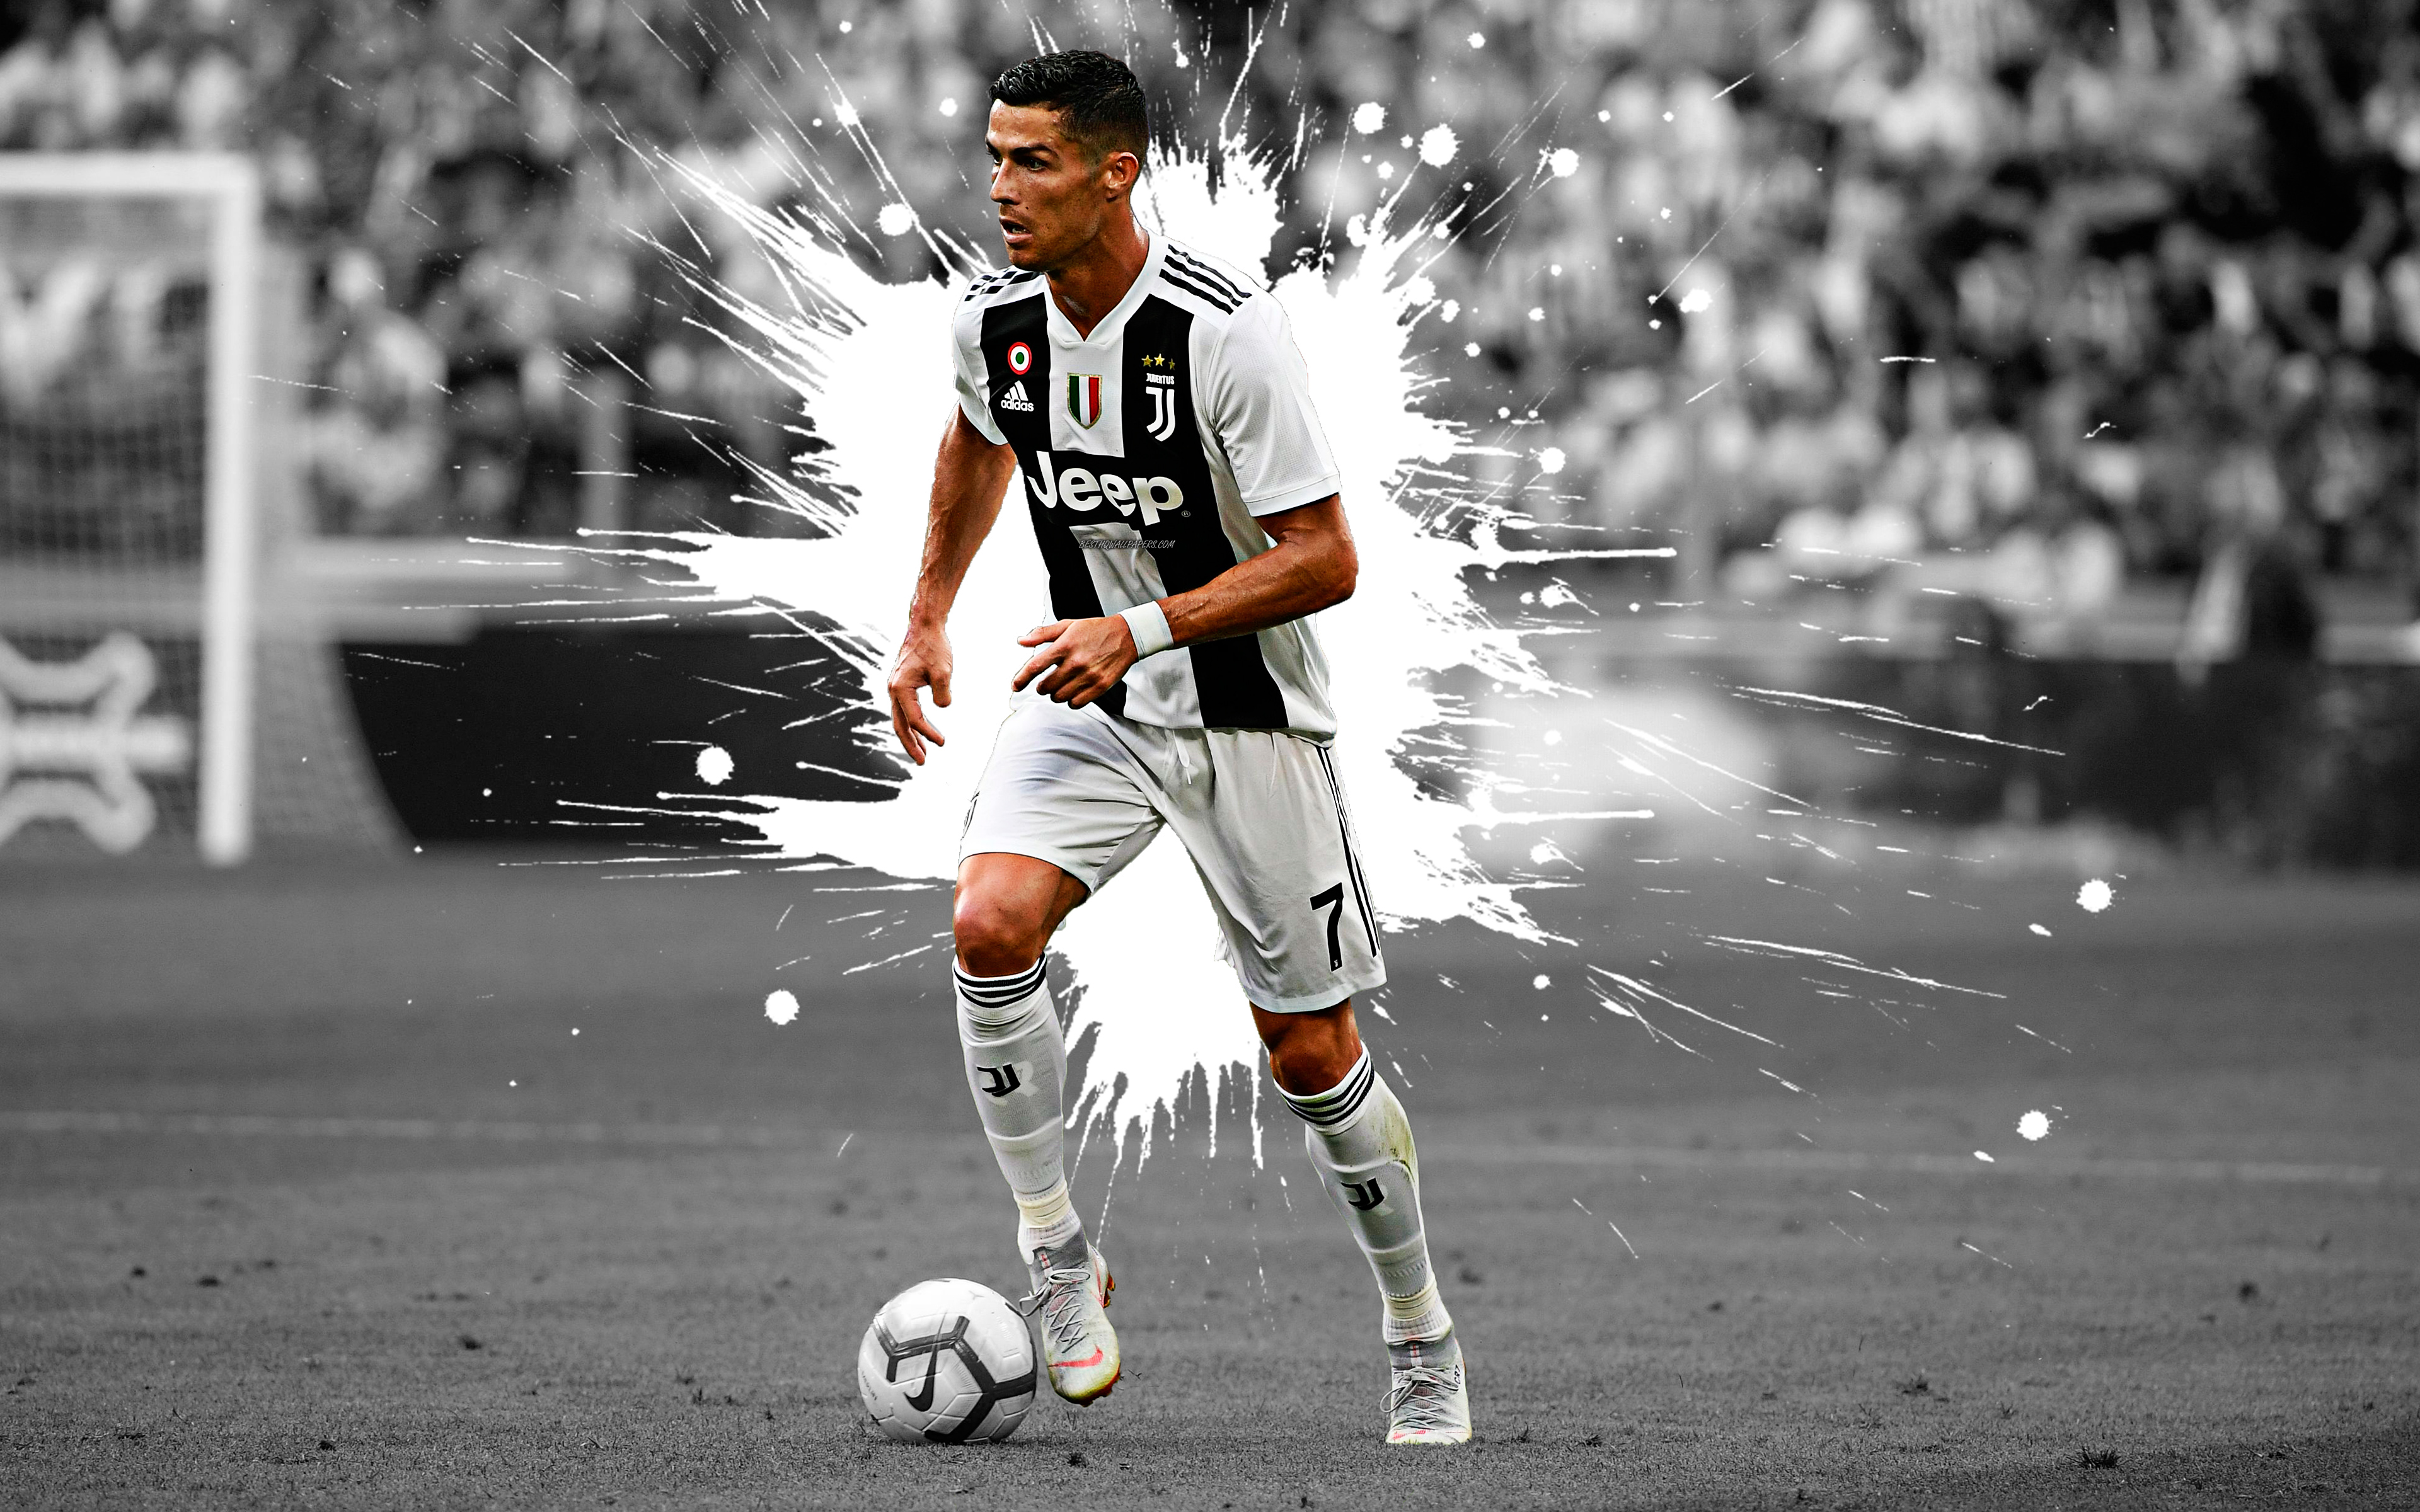 Download wallpaper Cristiano Ronaldo, 4k, art, striker, Juventus FC, Portuguese football player, football star, black and white splashes of paint, grunge art, creative art, Serie A, Italy, football for desktop with resolution